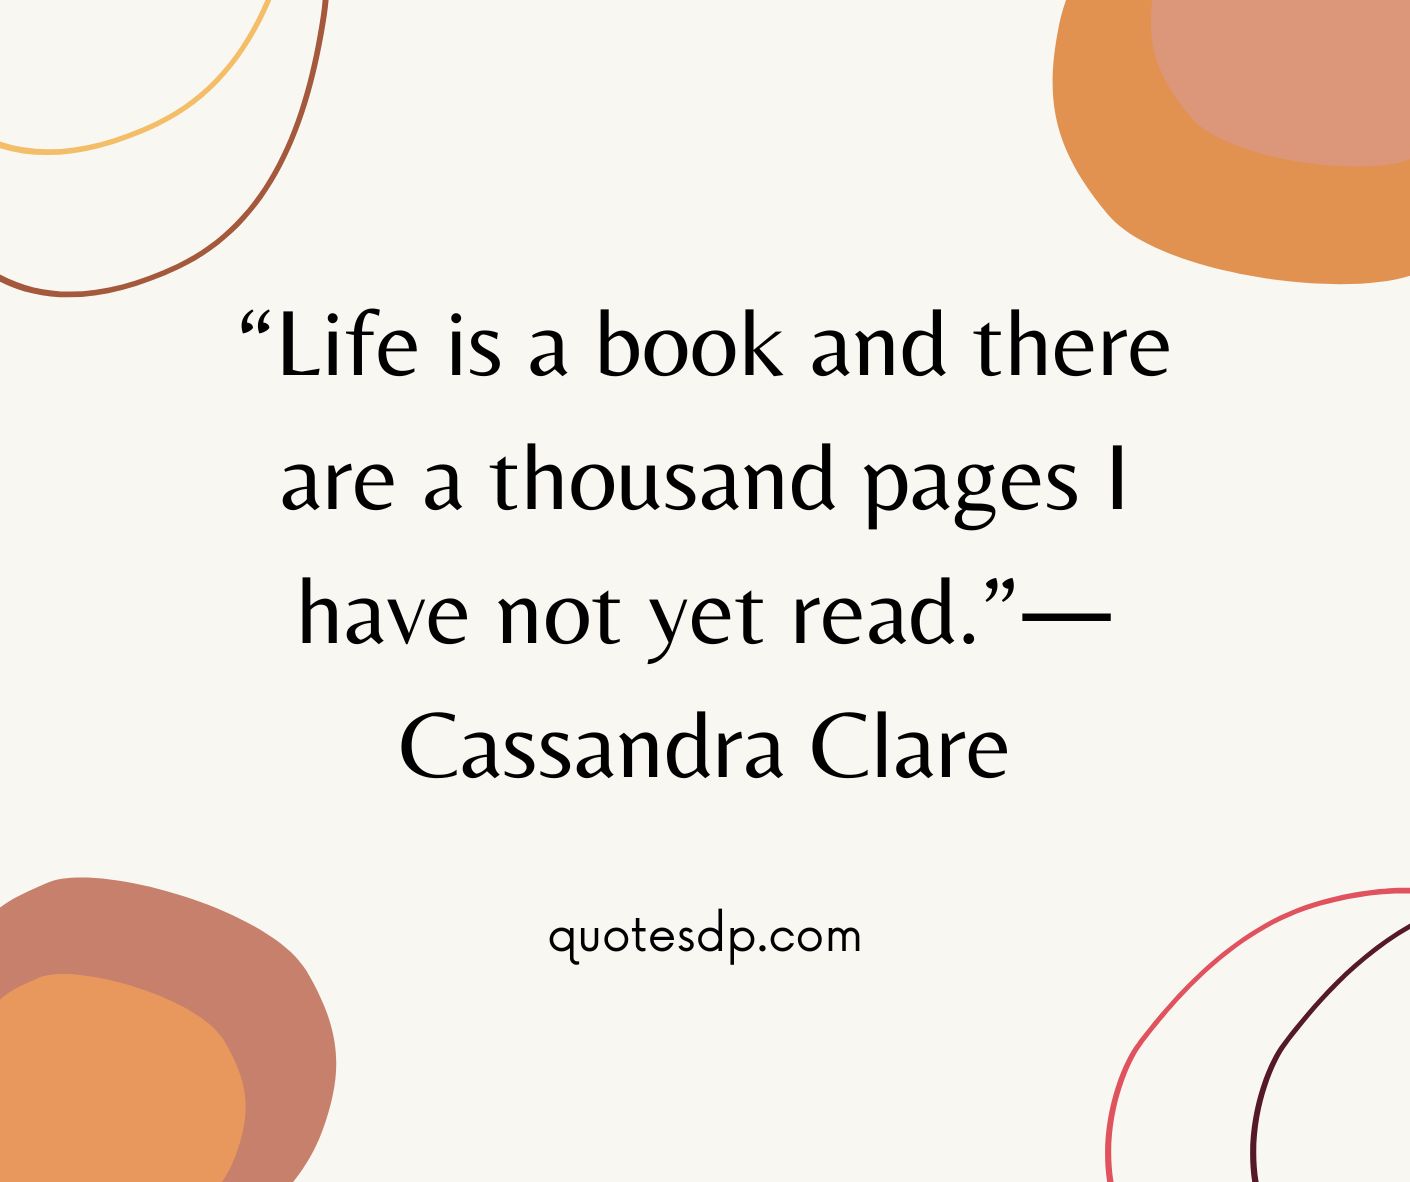 Cassandra Clare life quotes life is a book